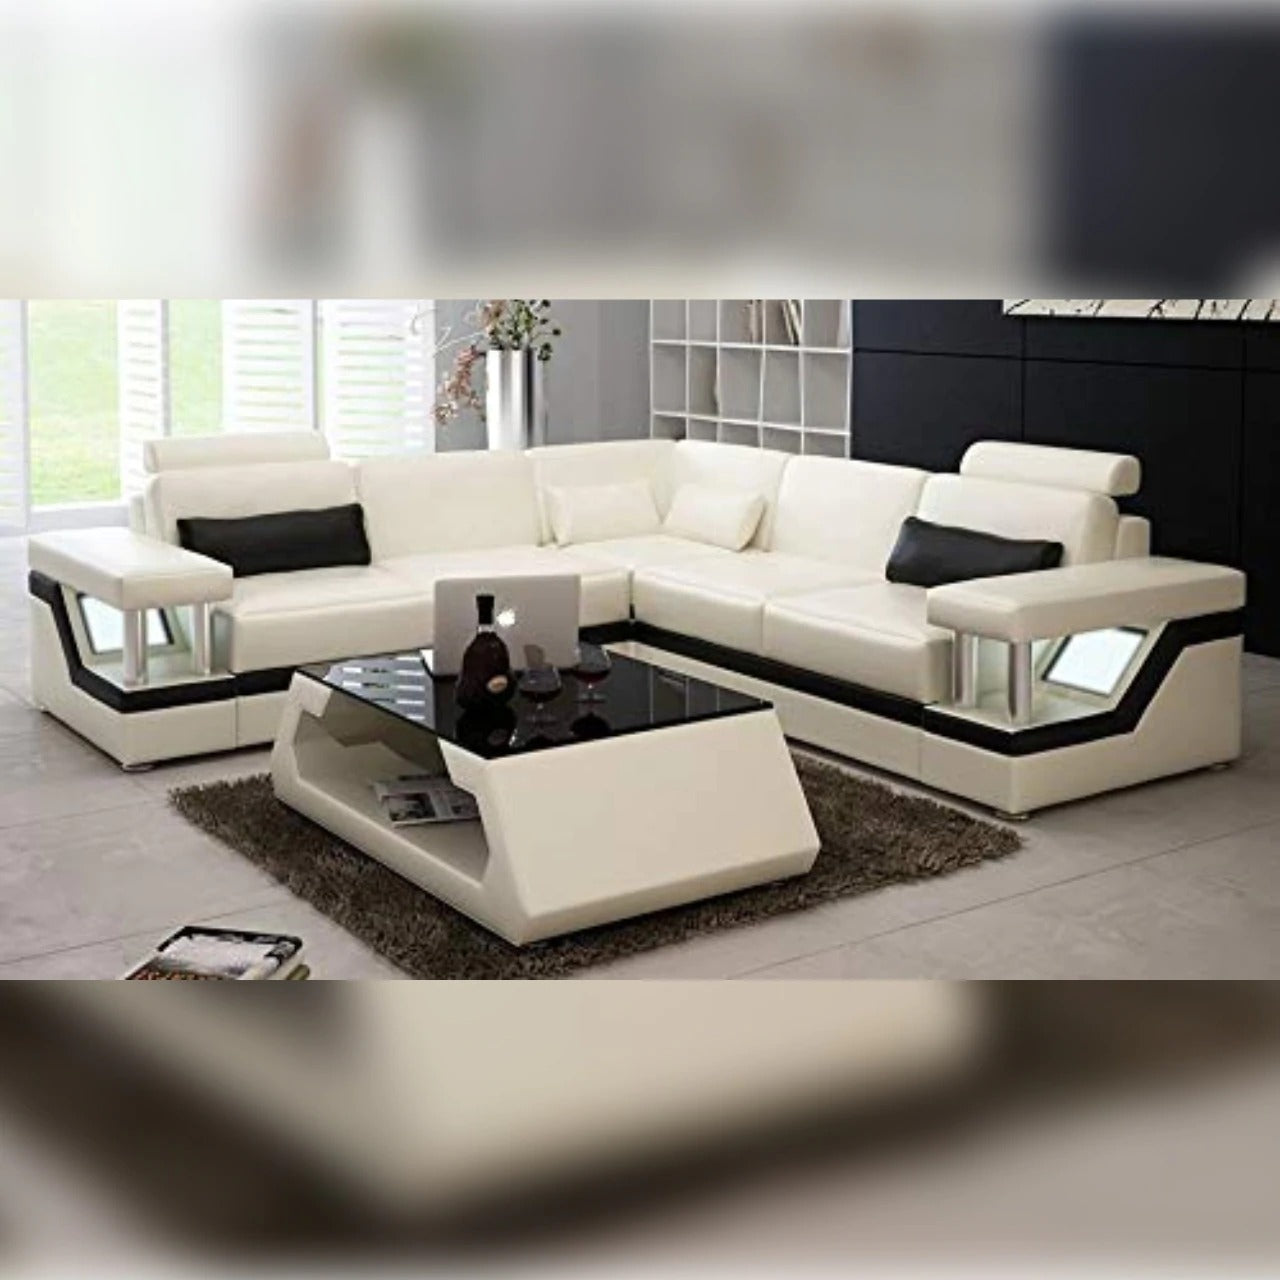 Buy L Shape Sofa Online At Best Prices In India! – Gkw Retail